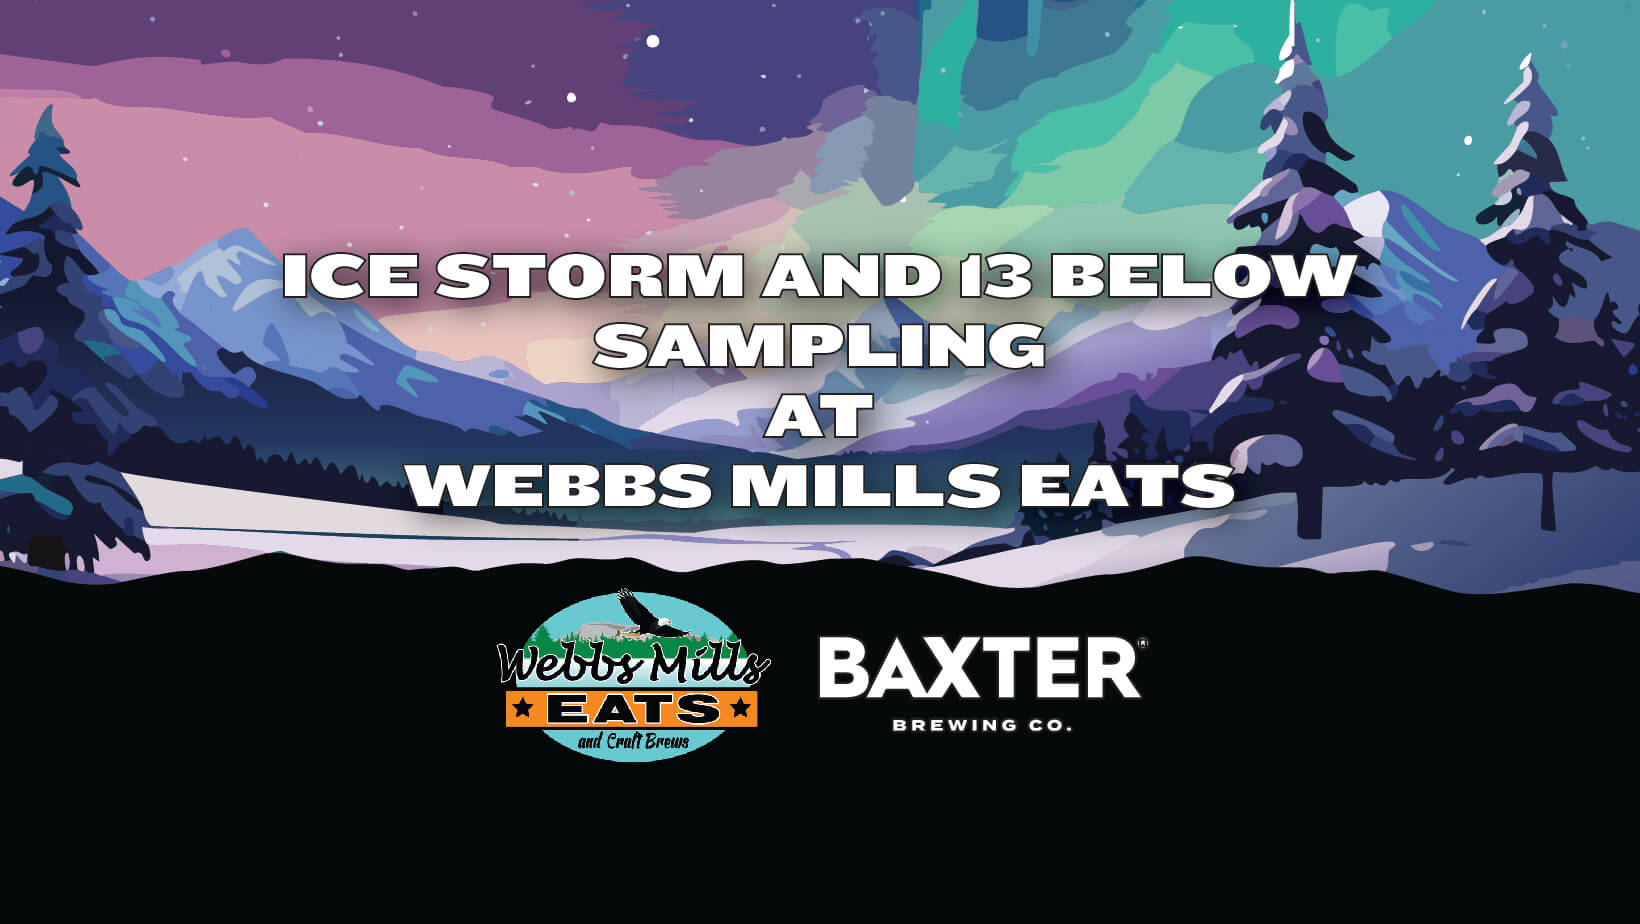 Image promoting a tasting at Webbs Mills Eats on February 29th.